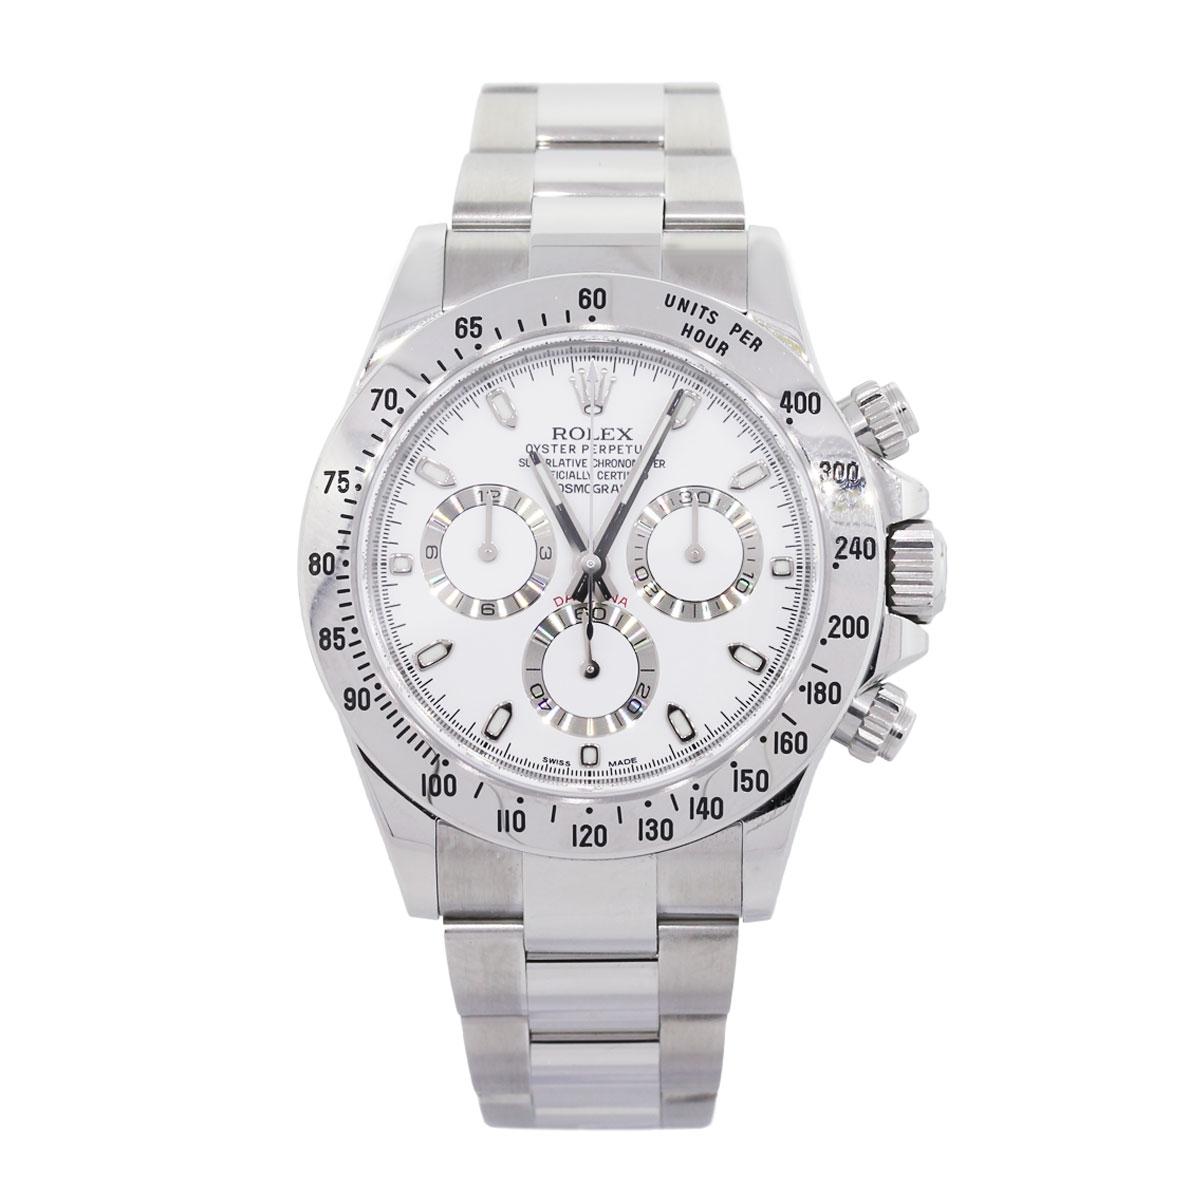 Brand: Rolex
MPN: 116520
Model: Daytona
Case Material: Stainless Steel
Case Diameter: 40mm
Crystal: Scratch resistant sapphire
Bezel: Stainless steel
Dial: White chronograph dial
Bracelet: Stainless steel oyster band
Size: Will fit a 6.50″